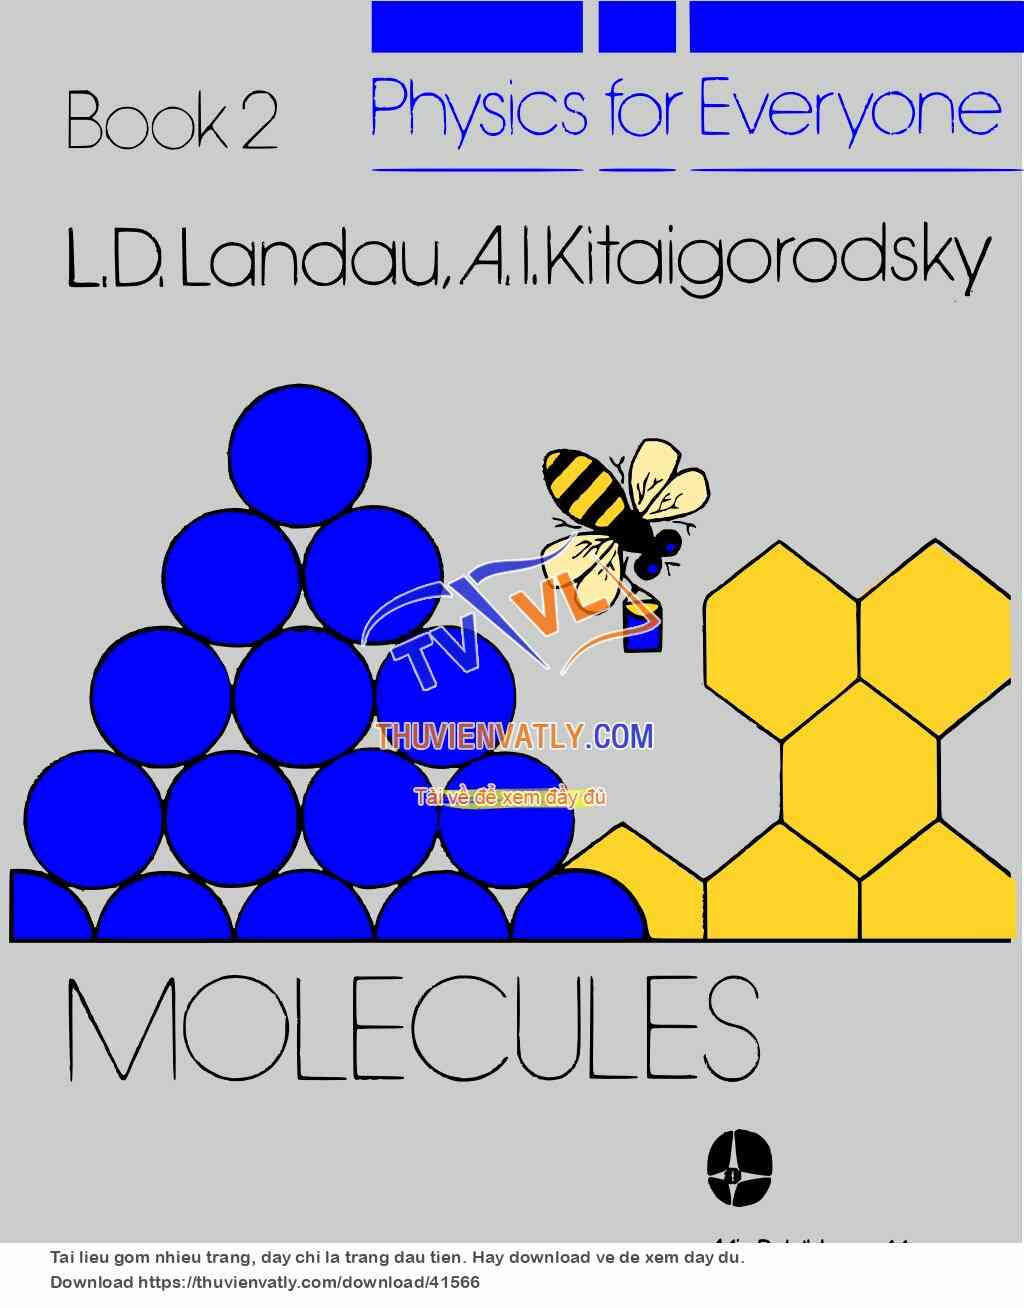 Physics for Everyone - Book 2 - Molecules